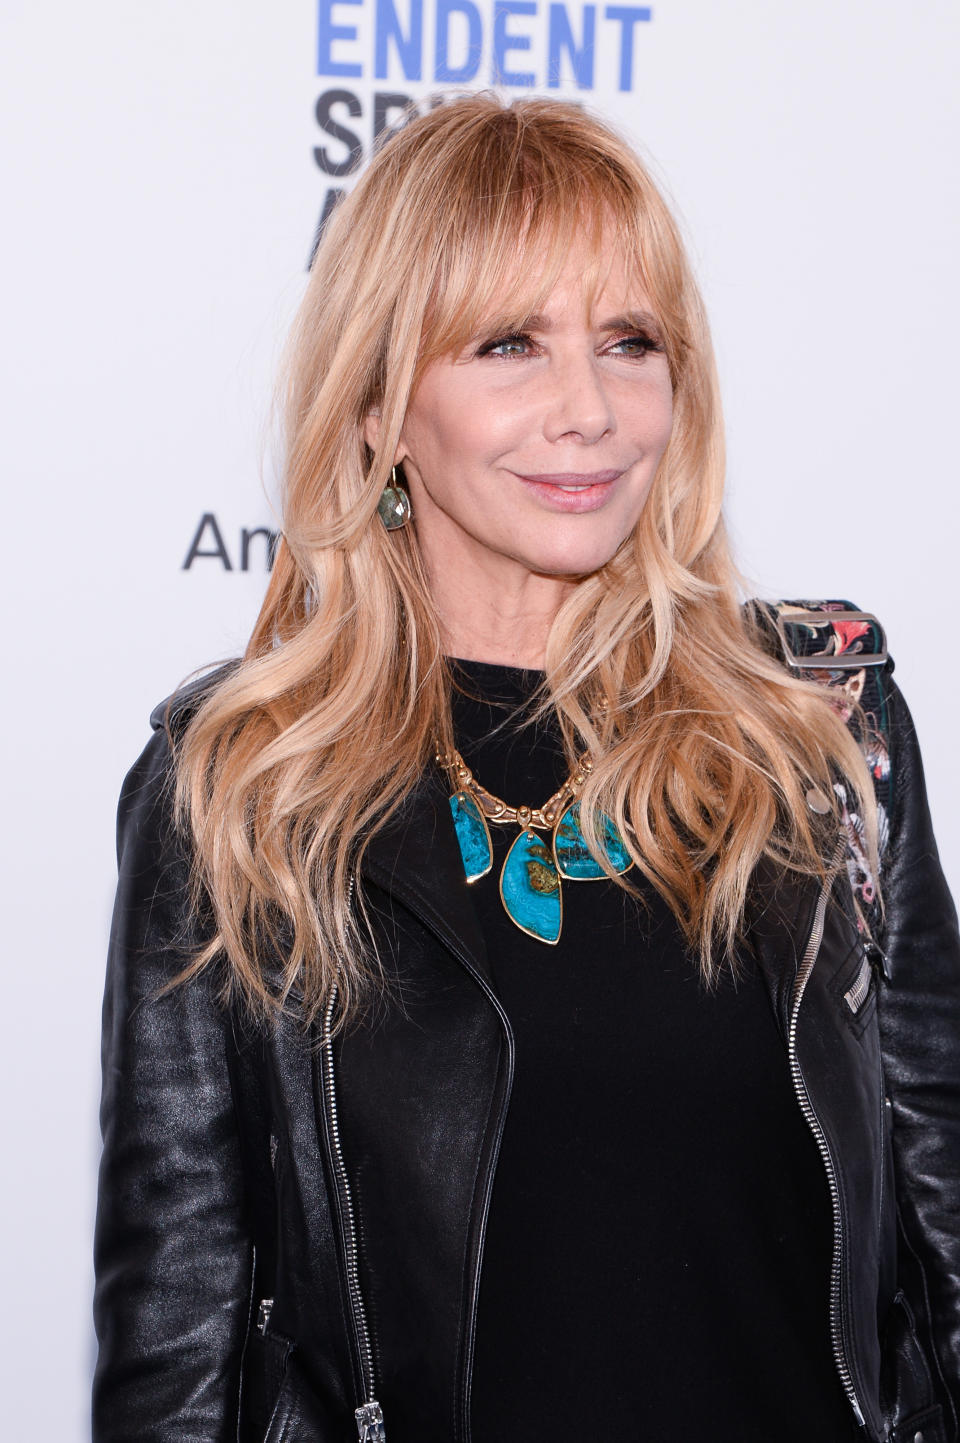 Rosanna Arquette walking the red carpet during the 2017 Film Independent Spirit Awards held on Santa Monica Beach in Santa Monica, California on February 25, 2017. (Photo by Anthony Behar) *** Please Use Credit from Credit Field ***